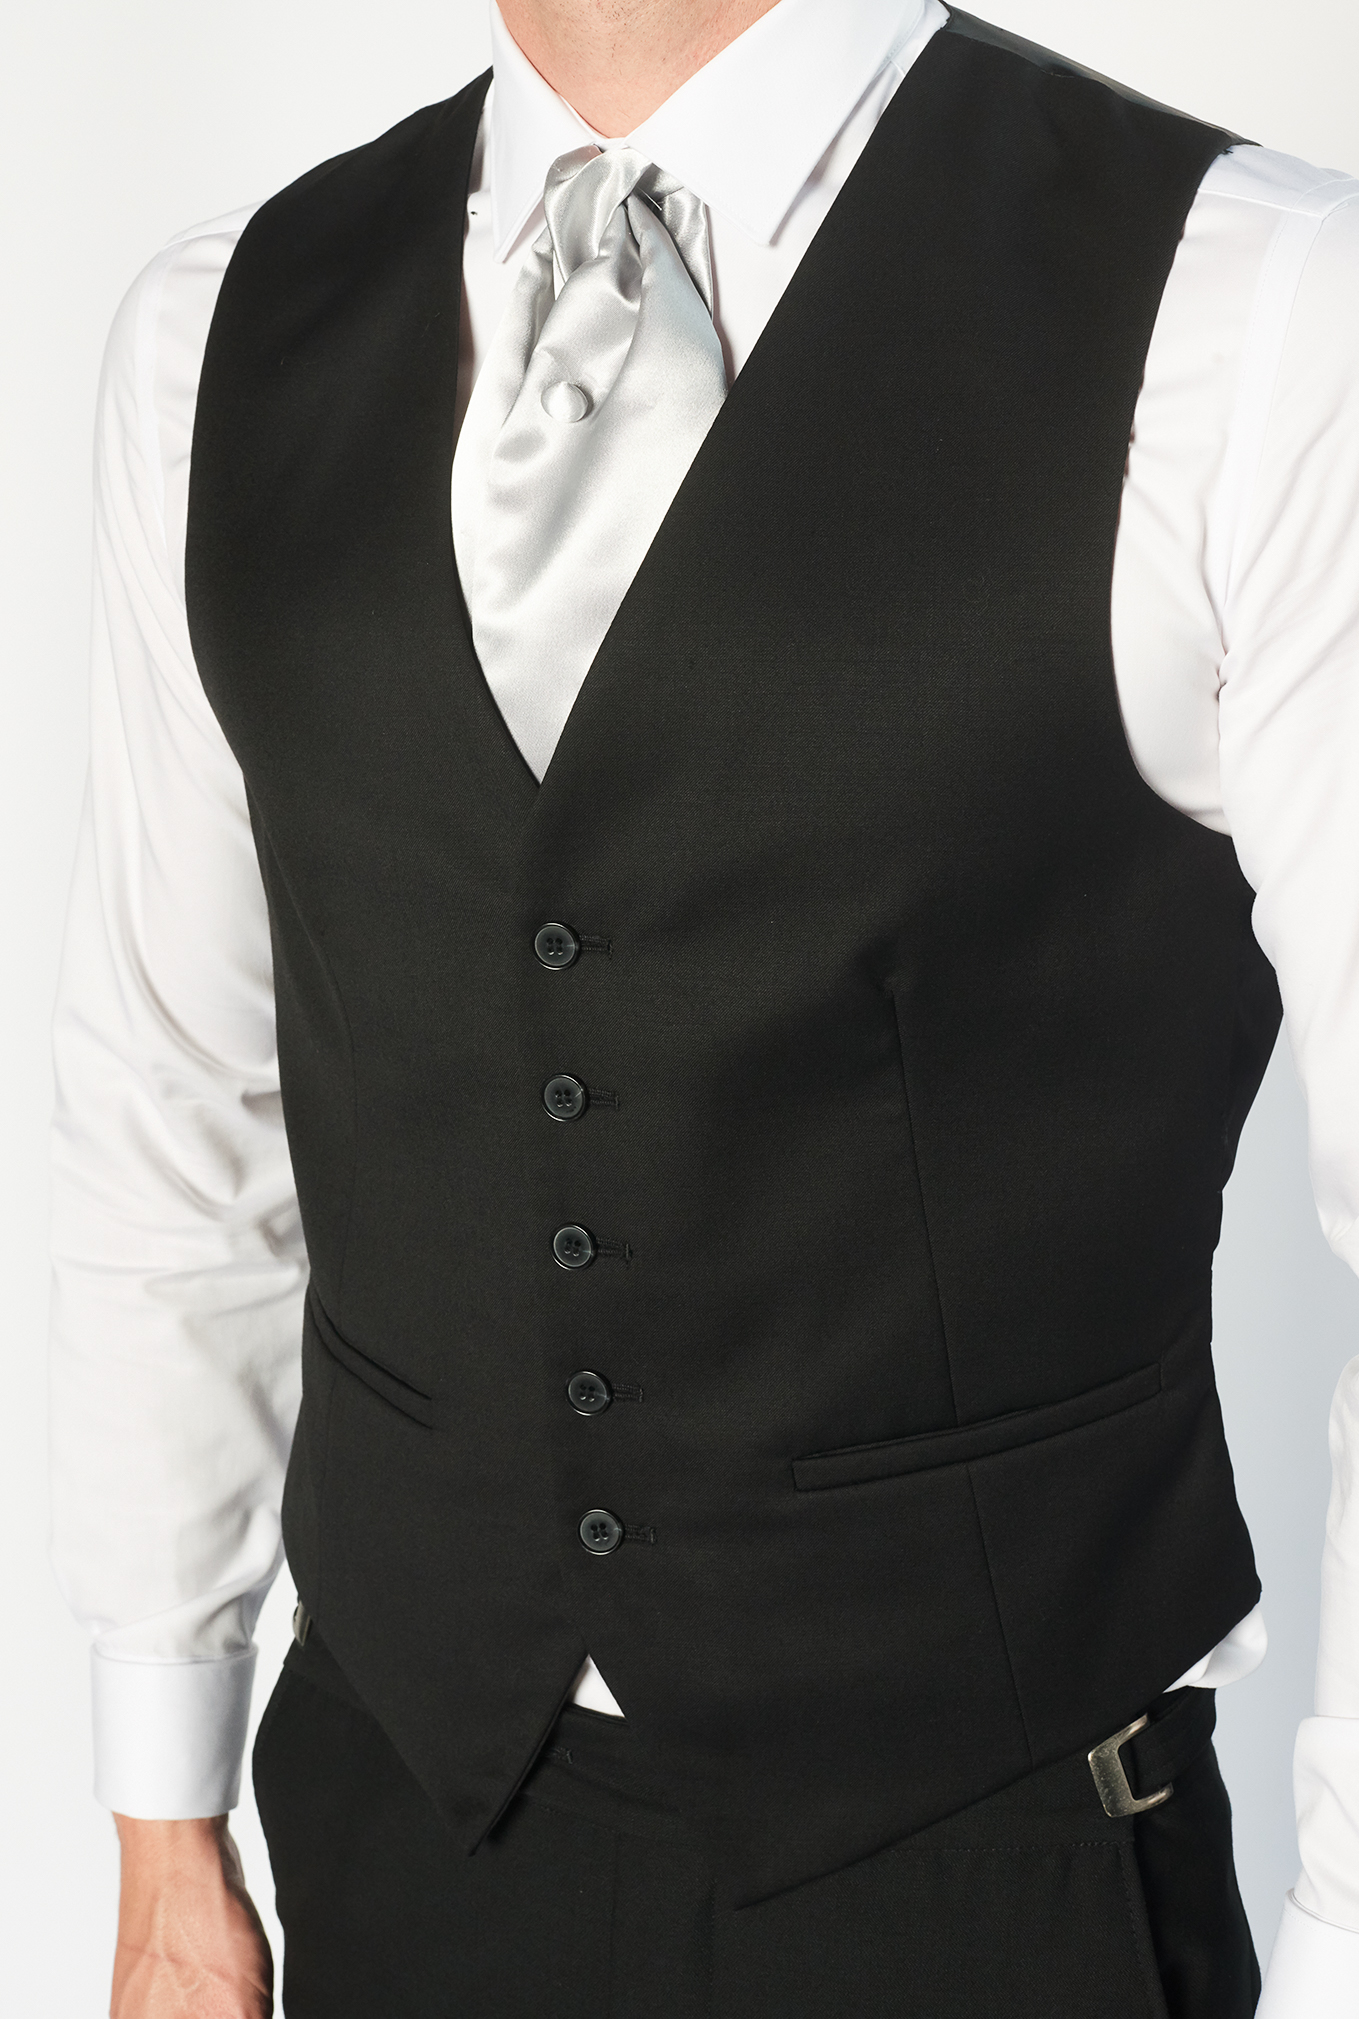 black vest and white shirt for hire/sale brittons formal wear